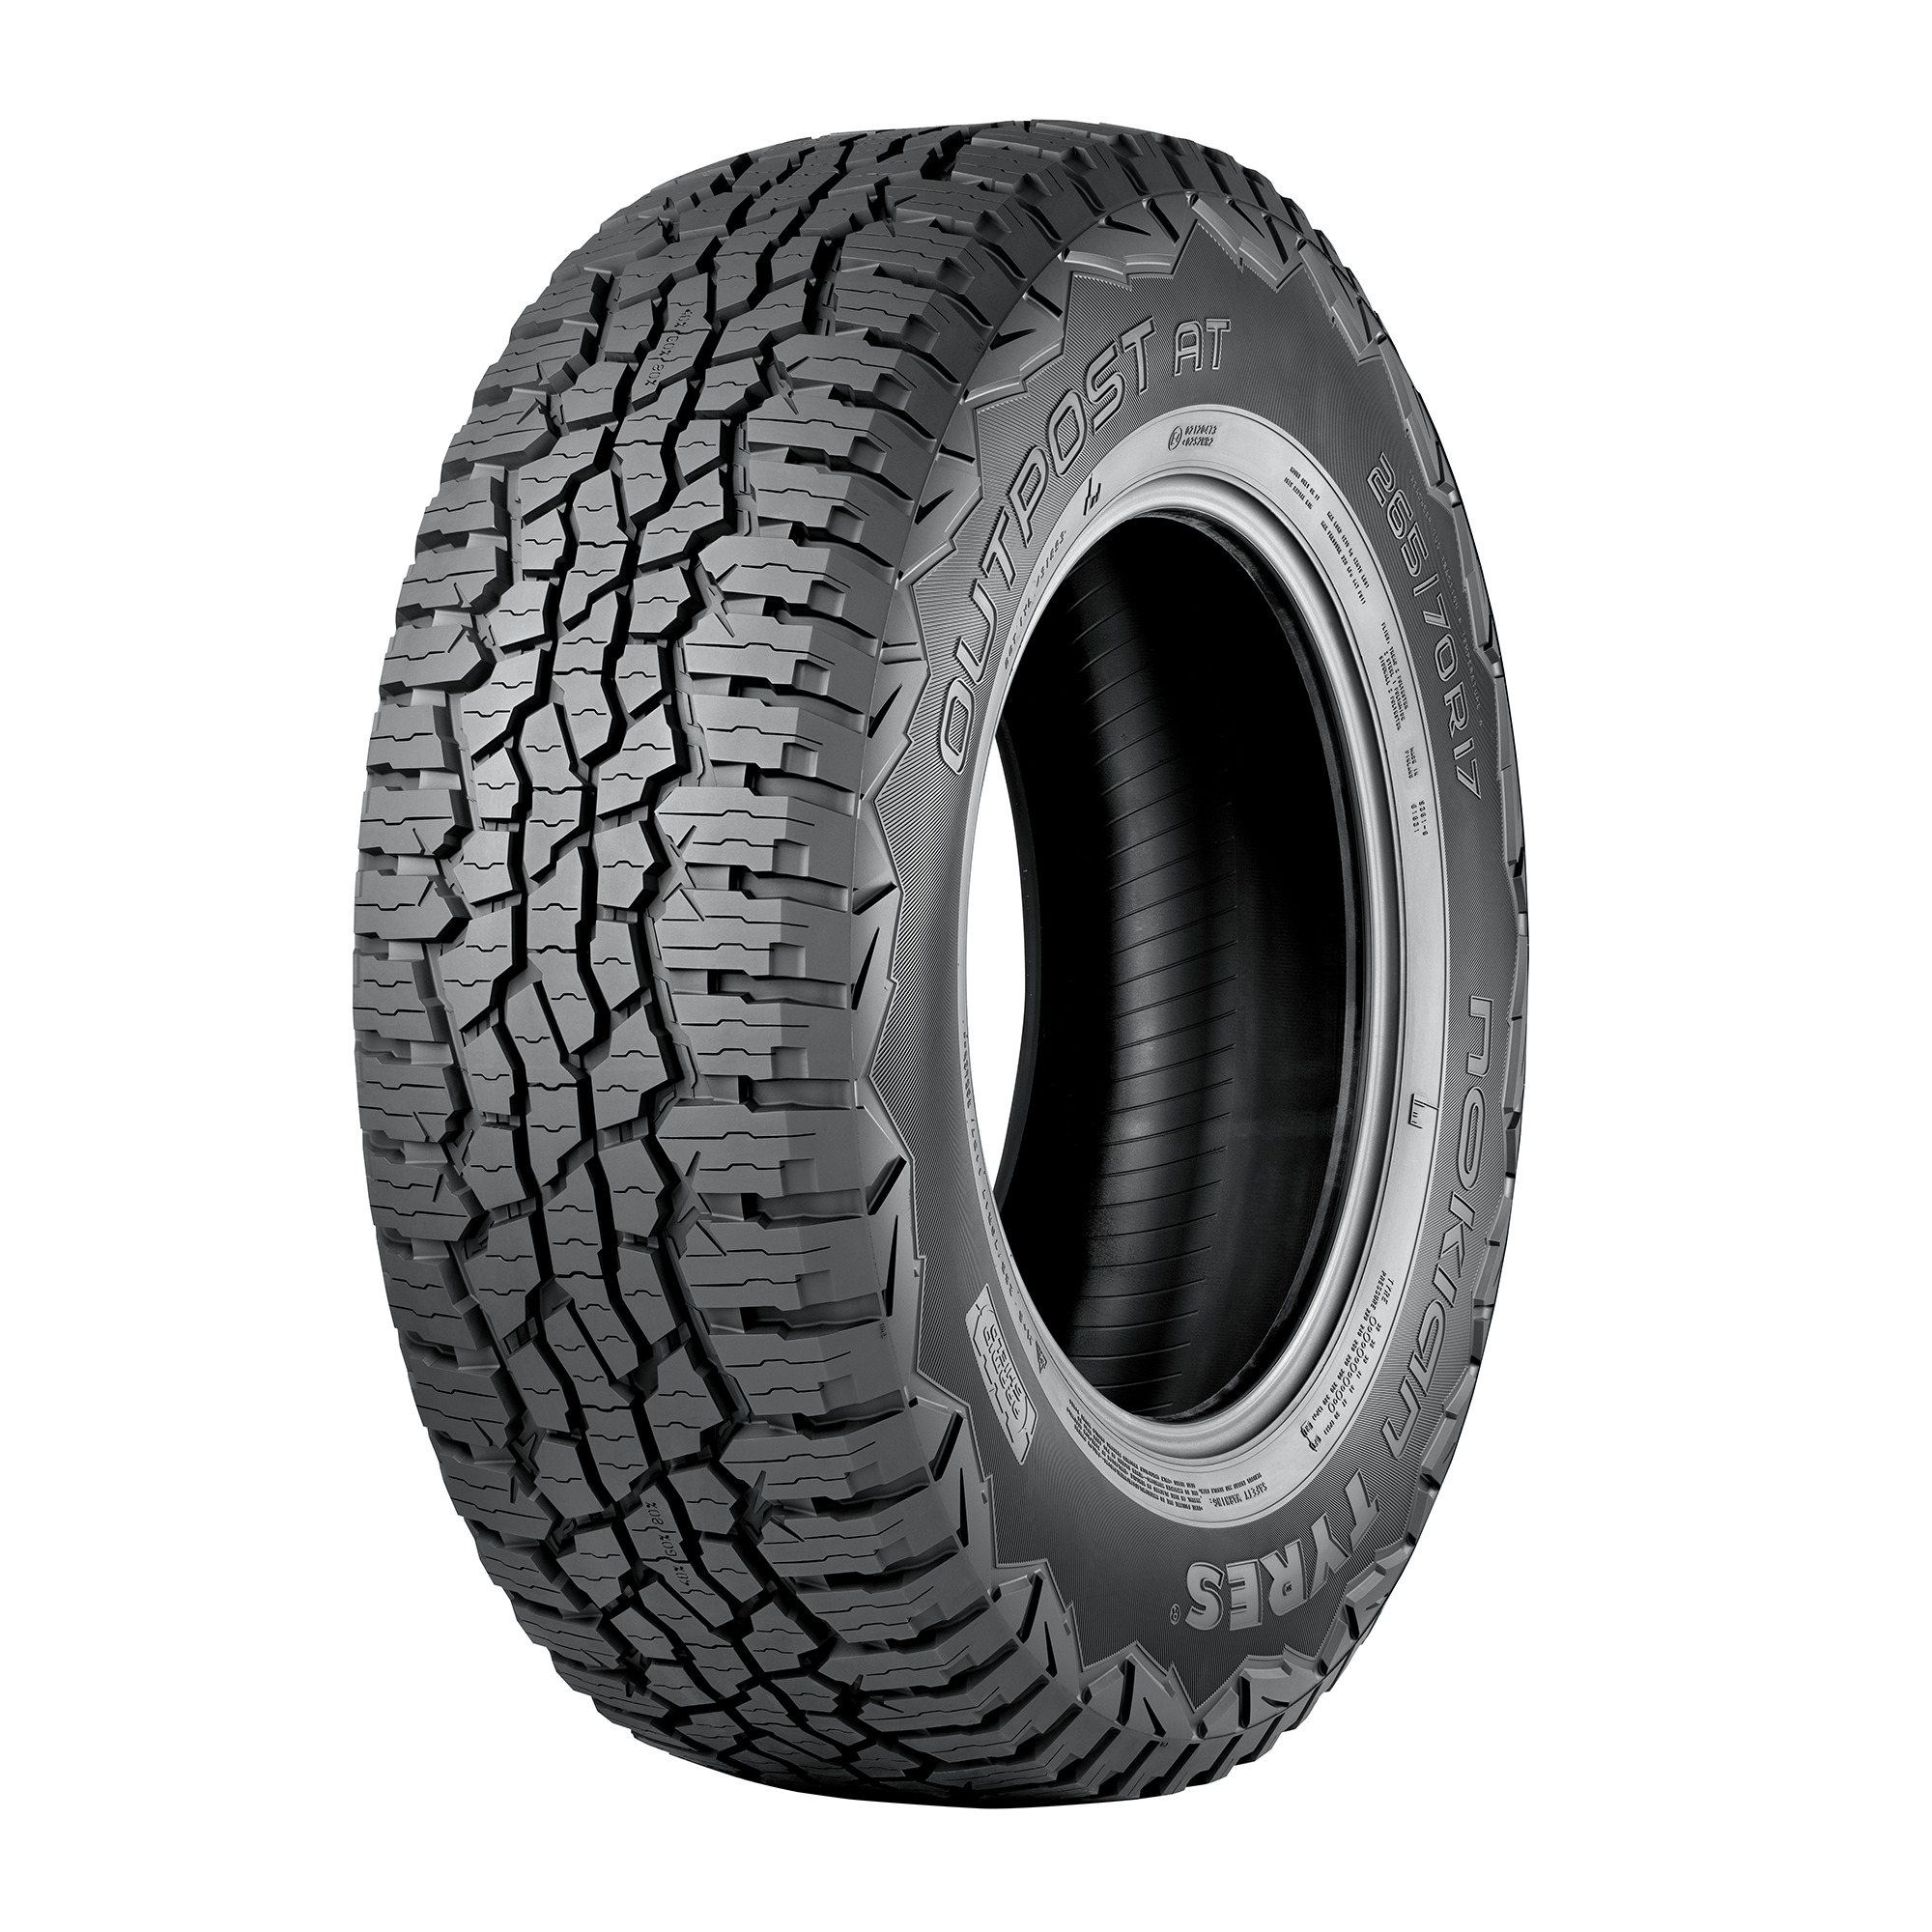 Резина ат 215 65 r16. Nokian Outpost at 265/70 r16. Nokian Tyres Outpost at 215/65 r16. Нокиан оутпост АТ 245/70 r17. Шина Nokian Outpost at.